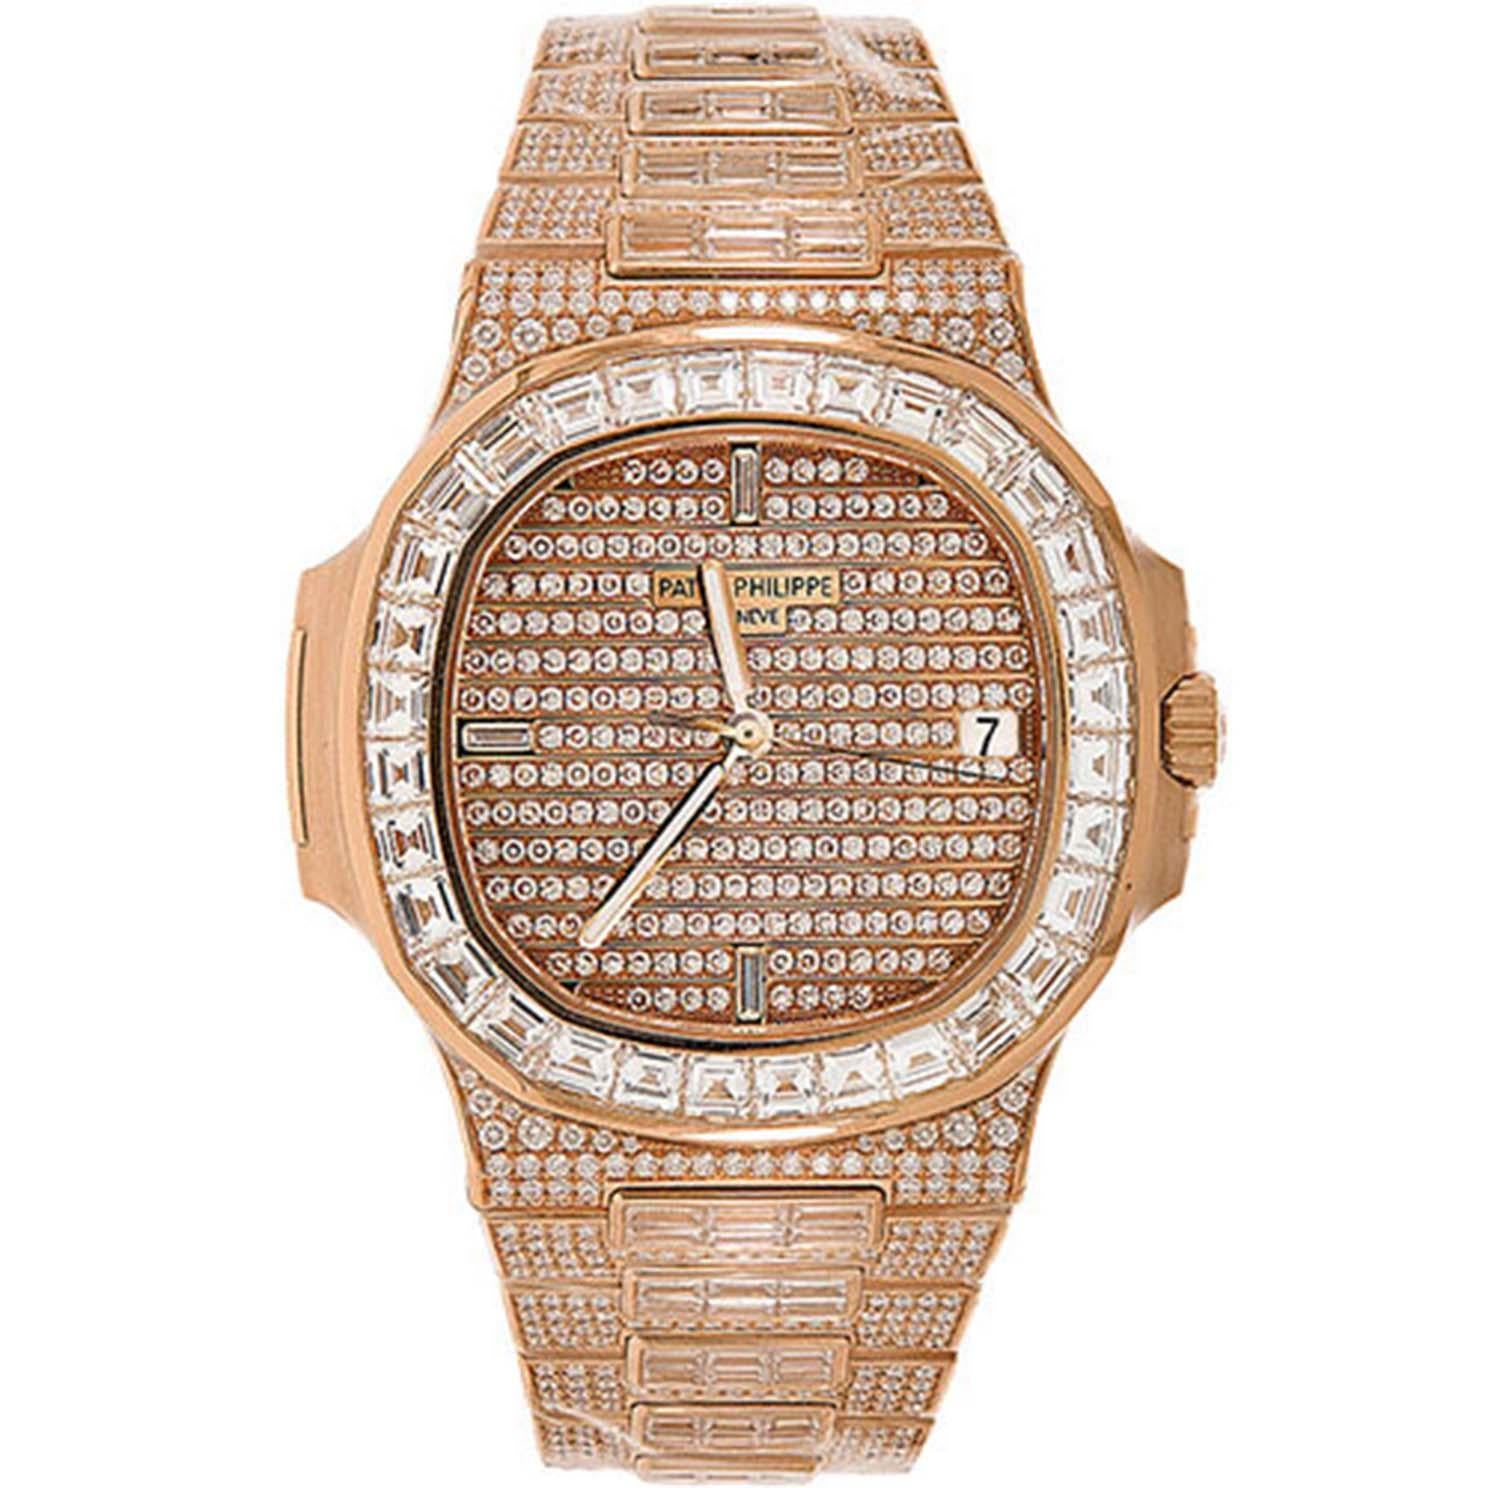 Brand: Patek Philippe

Series: Nautilus 

Ref No.: 5719/10R-010

Movement: Automatic

Case Material: 18k Rose Gold

Dial:  Rose Gold w/ Diamonds 

Crystal: Scratch Resistant Sapphire 

Bracelet Material: Rose Gold 

Box/Papers: YES / YES

Includes: